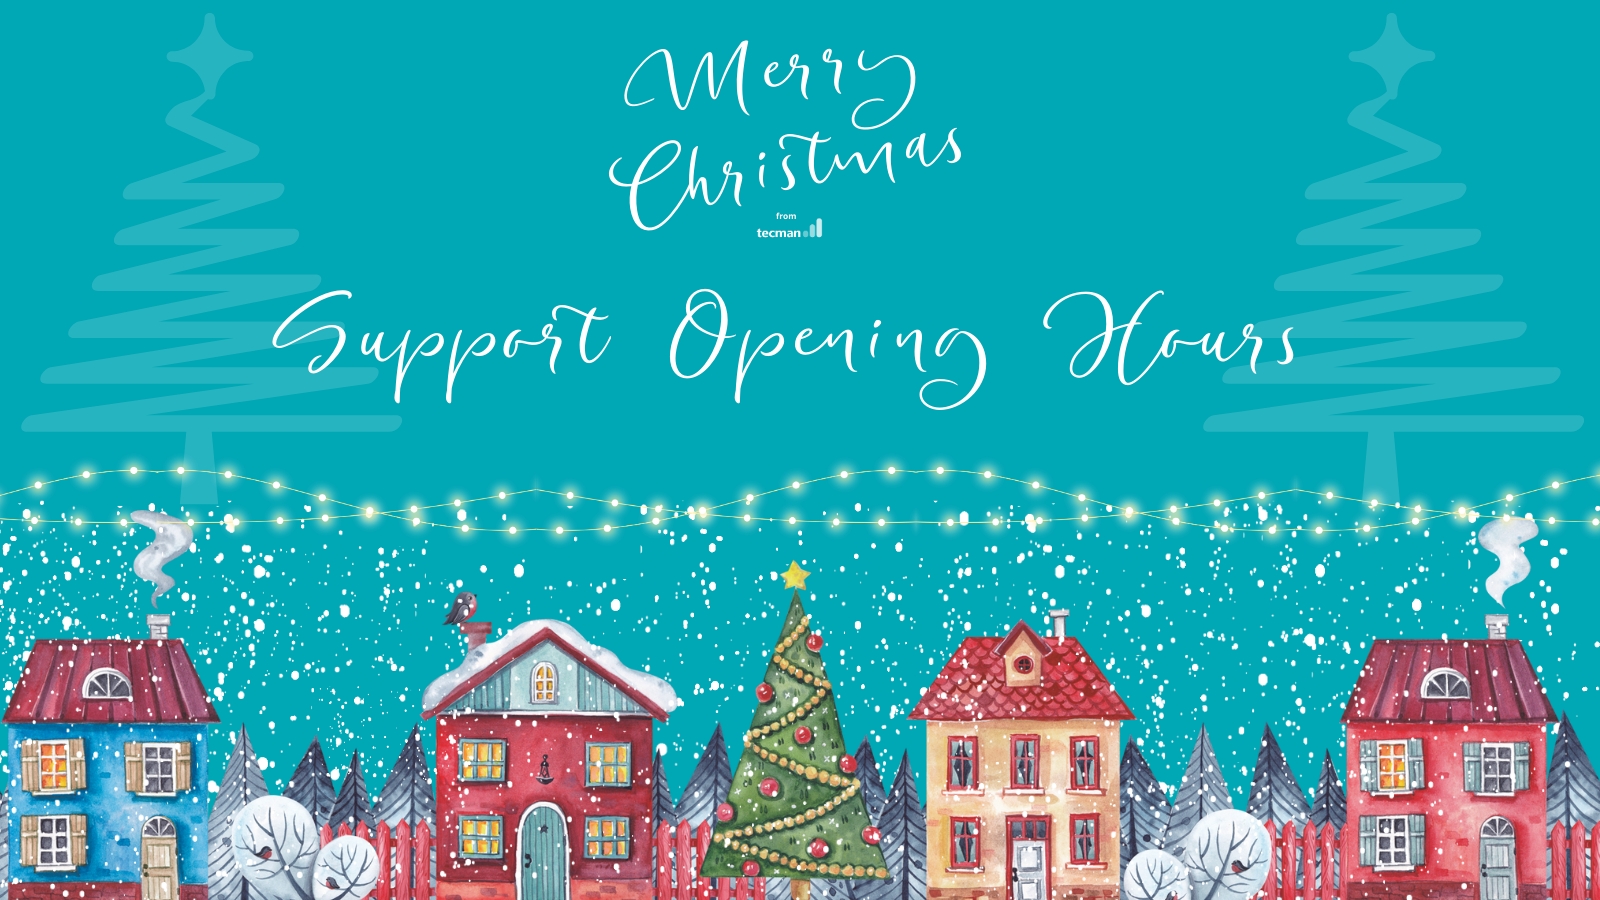 Our 2022 Christmas Opening Hours for Support